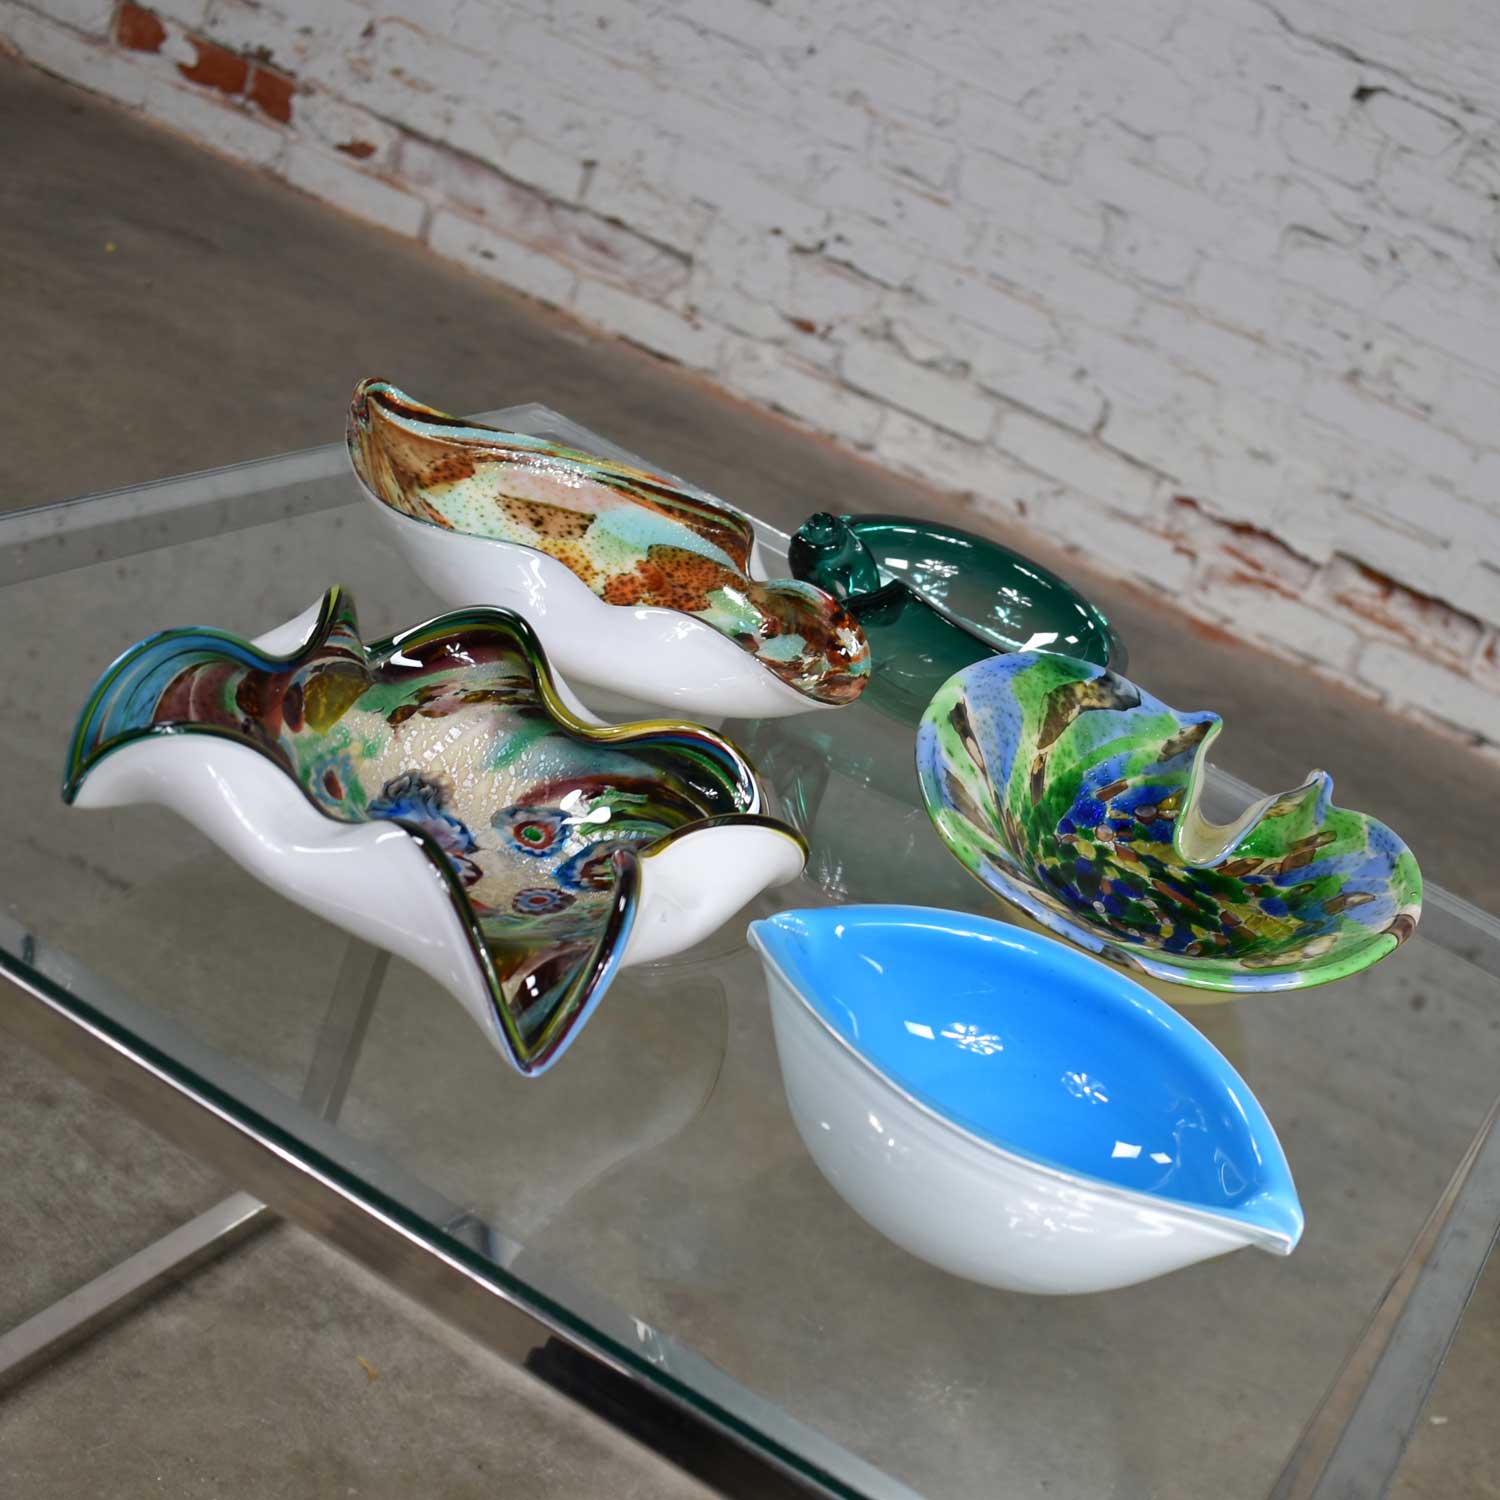 Set 5 Pieces Italian Murano Glass Dishes AVeM Tutti Frutti & Others Turquoise Blue Green